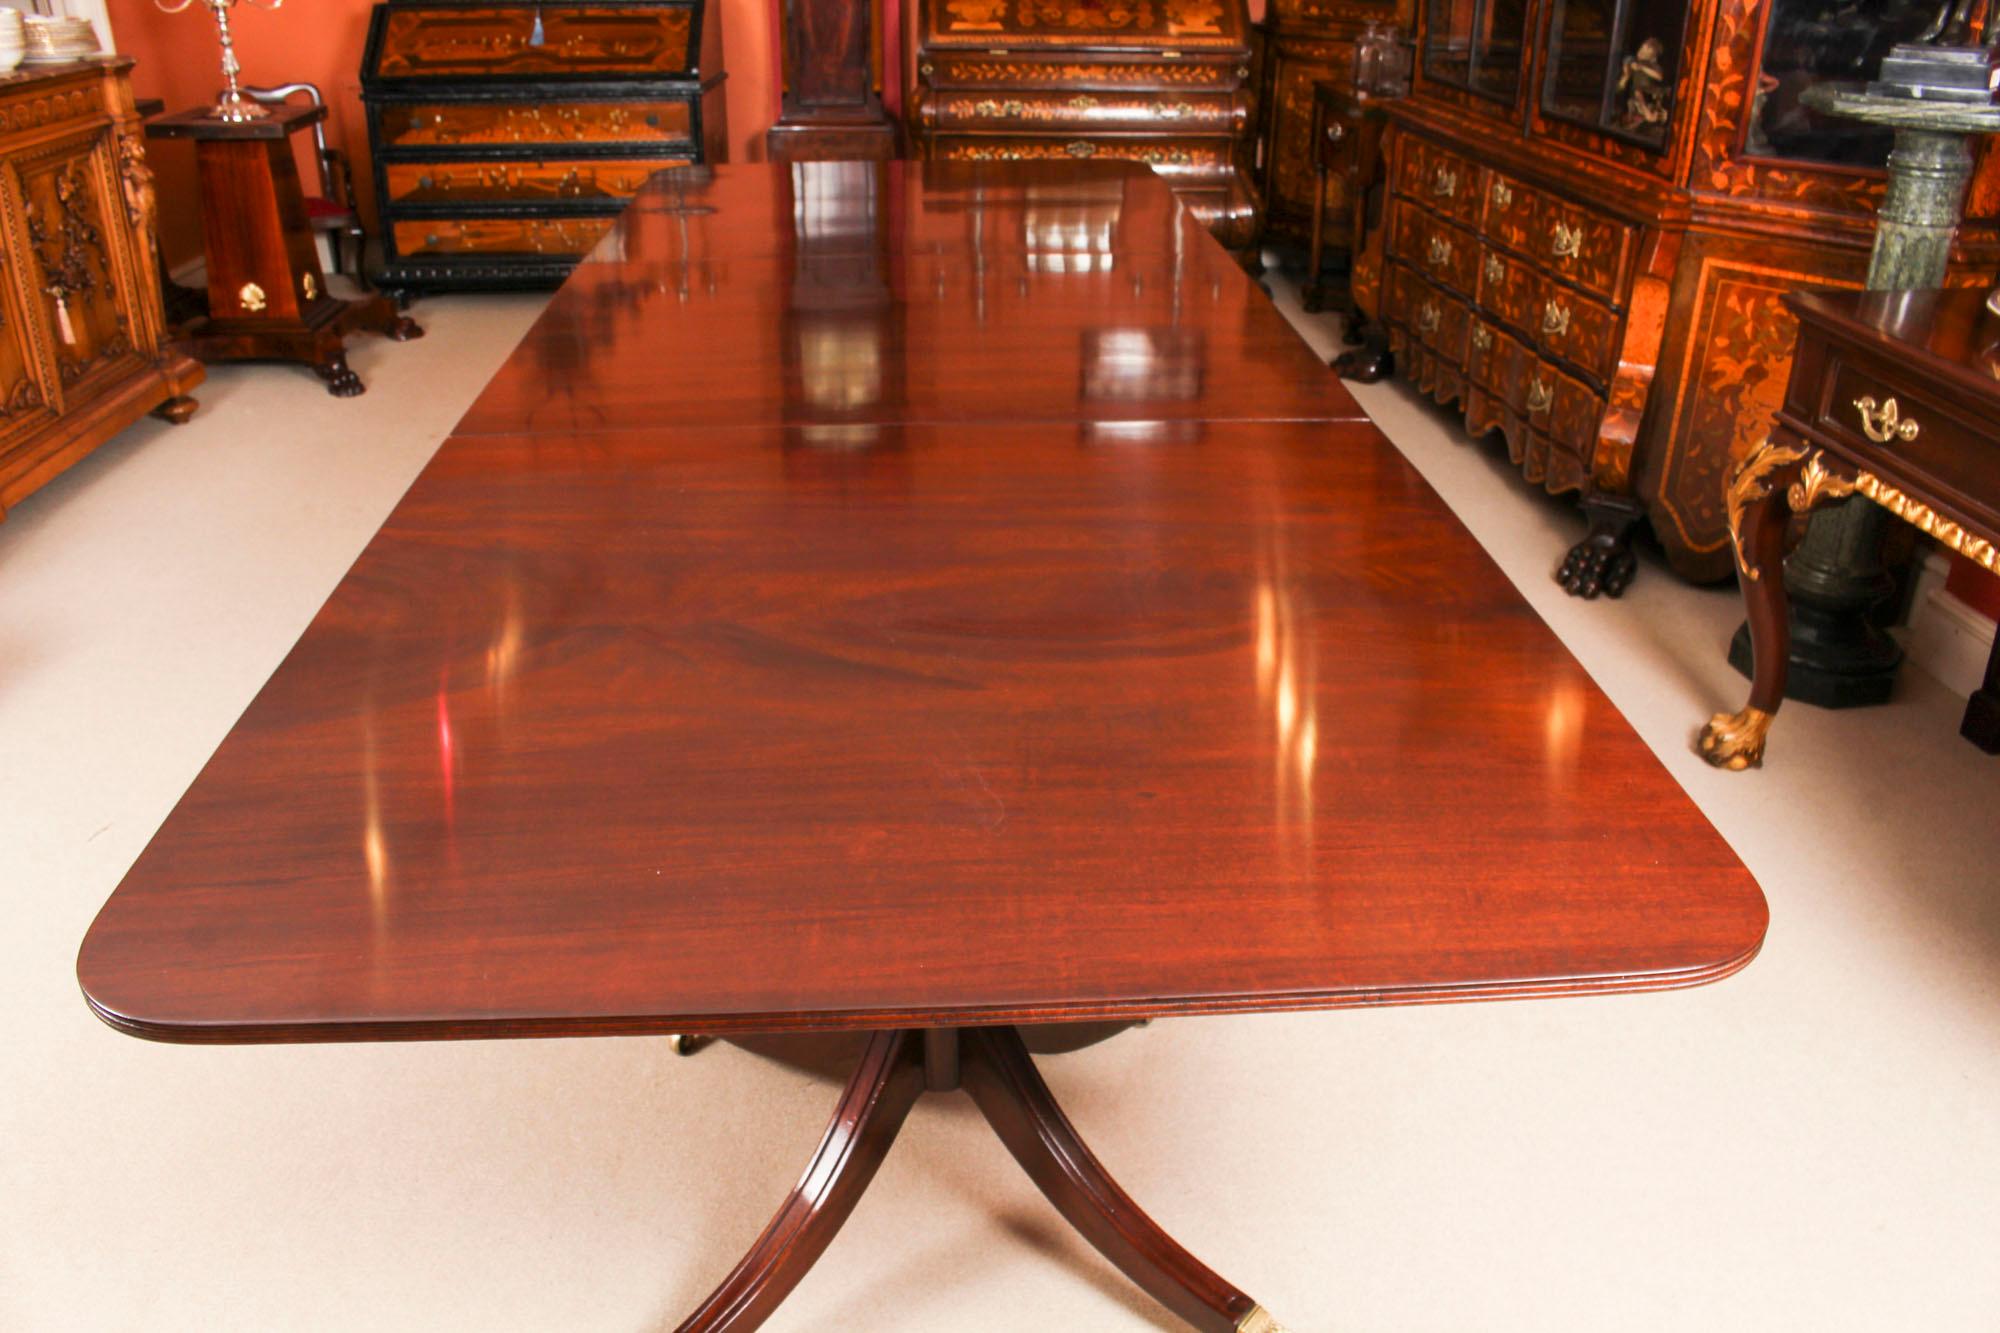 Mahogany Regency Revival Dining Table Early 20th Century and 12 Bespoke Dining Chairs